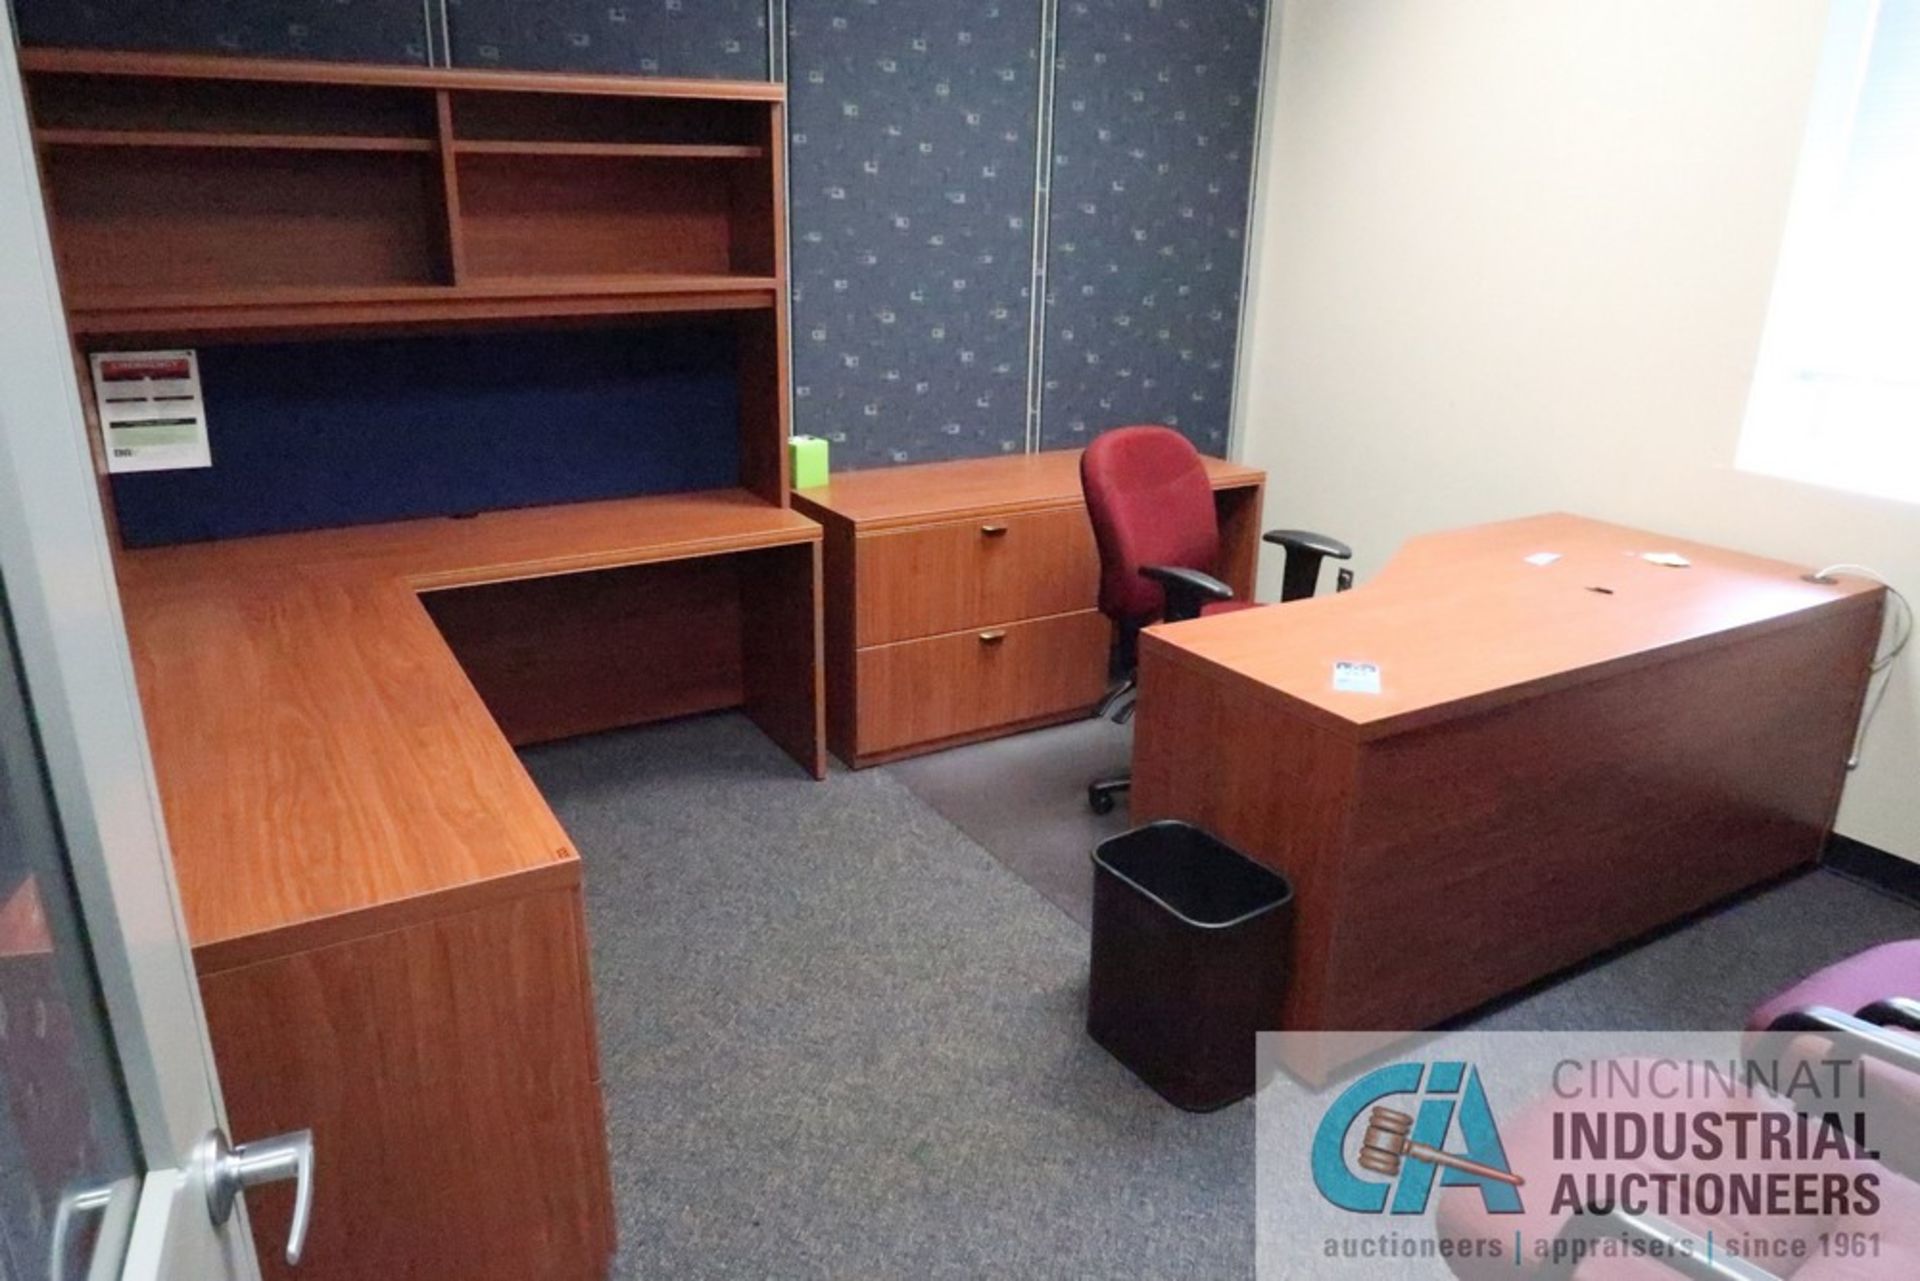 (LOT) CONTENTS OF OFFICE INCLUDING L-SHAPED DESK, DESK, CREDENZA, BOOKSHELF, (3) CHAIRS